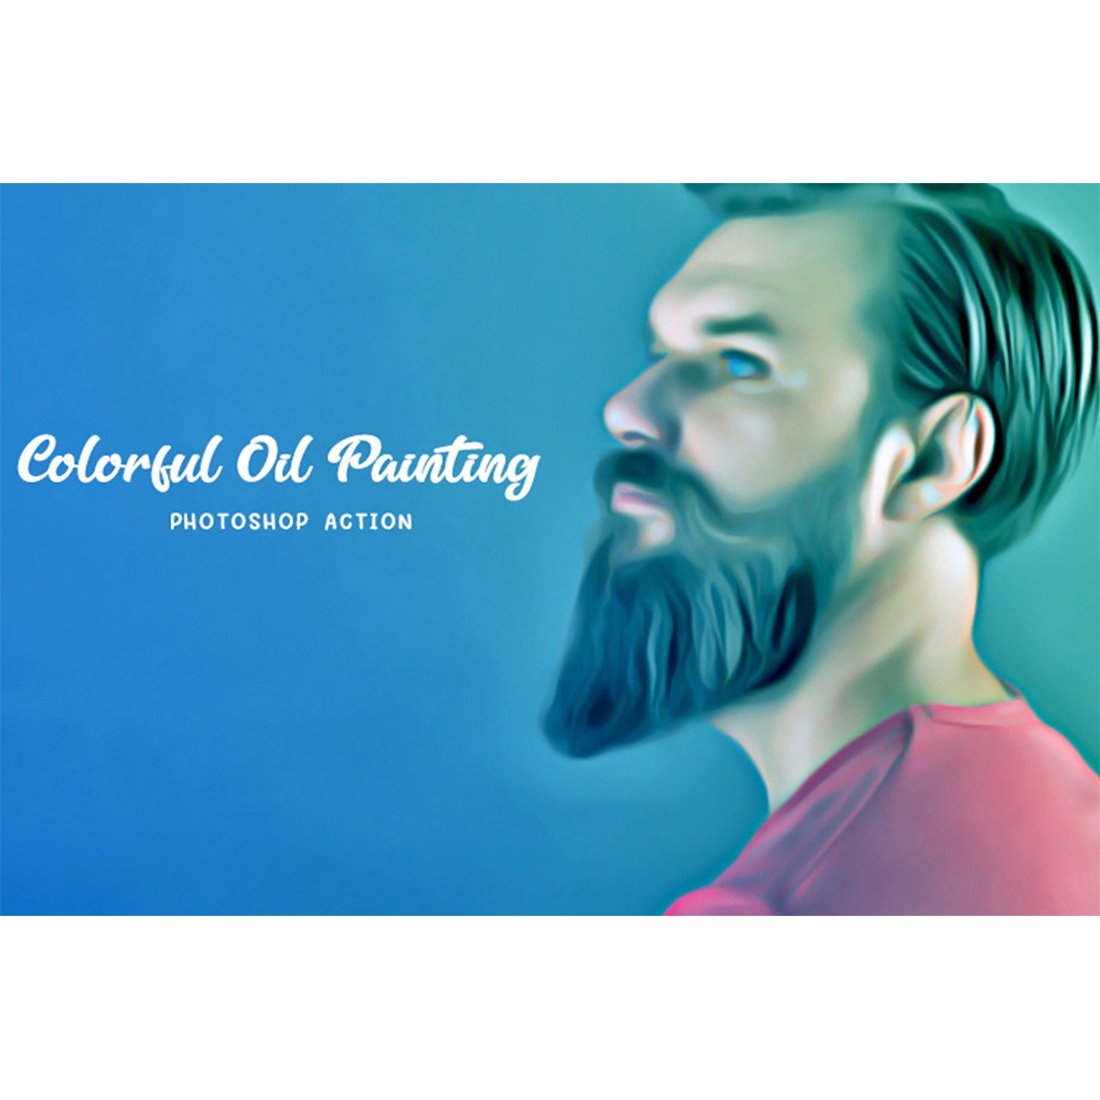 Colorful Oil Painting Photoshop Action cover image.